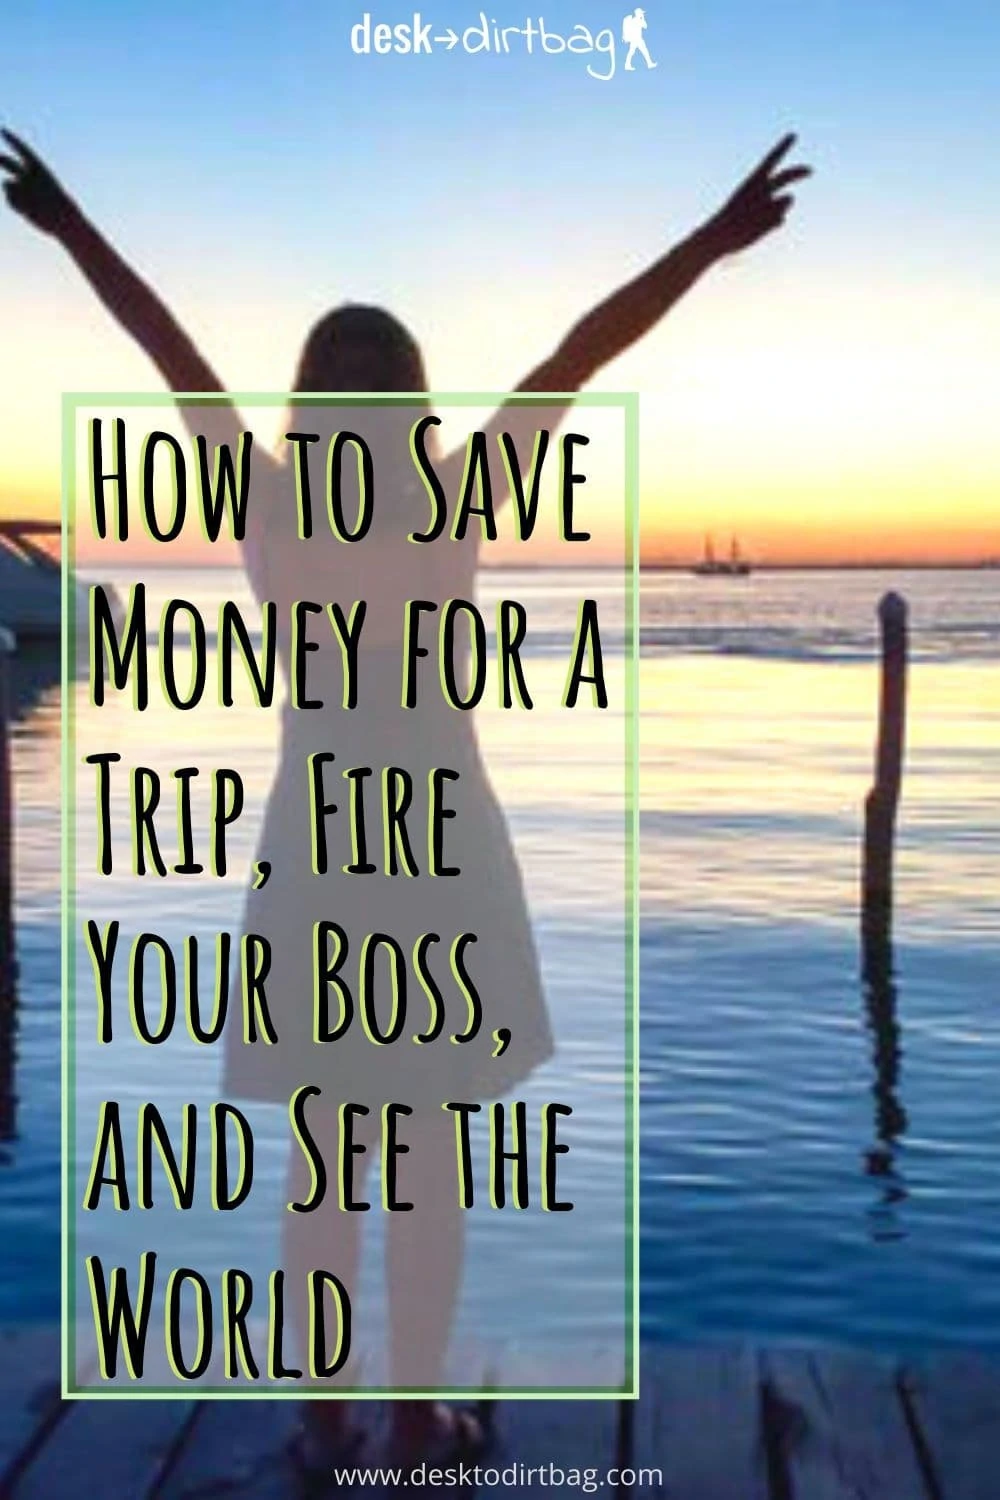 How to Save Money to Travel, Fire Your Boss, and See the World travel-tips-and-resources, travel, budget-and-finance